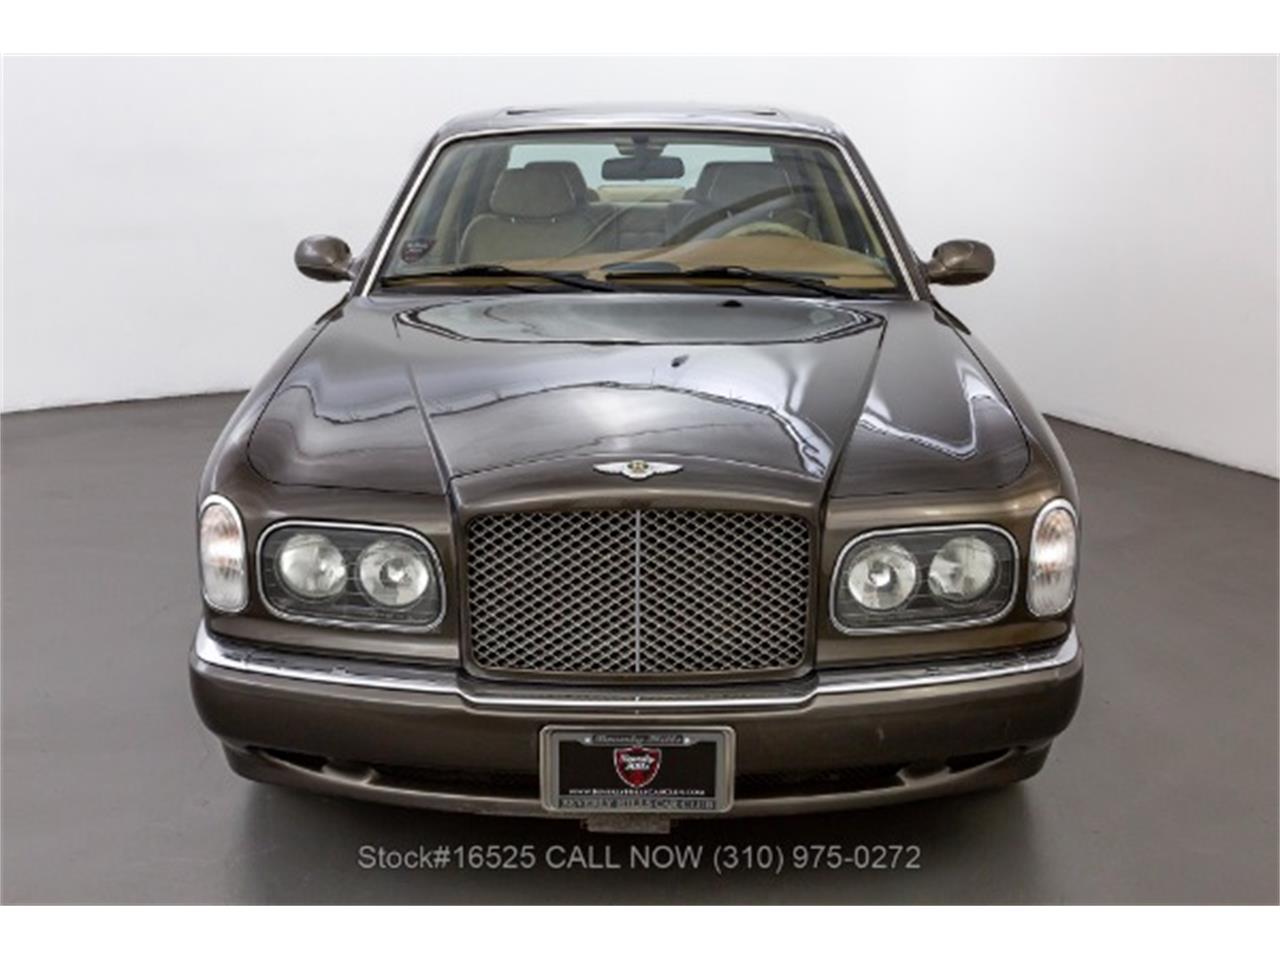 For Sale: 1999 Bentley Arnage in Beverly Hills, California for sale in Beverly Hills, CA